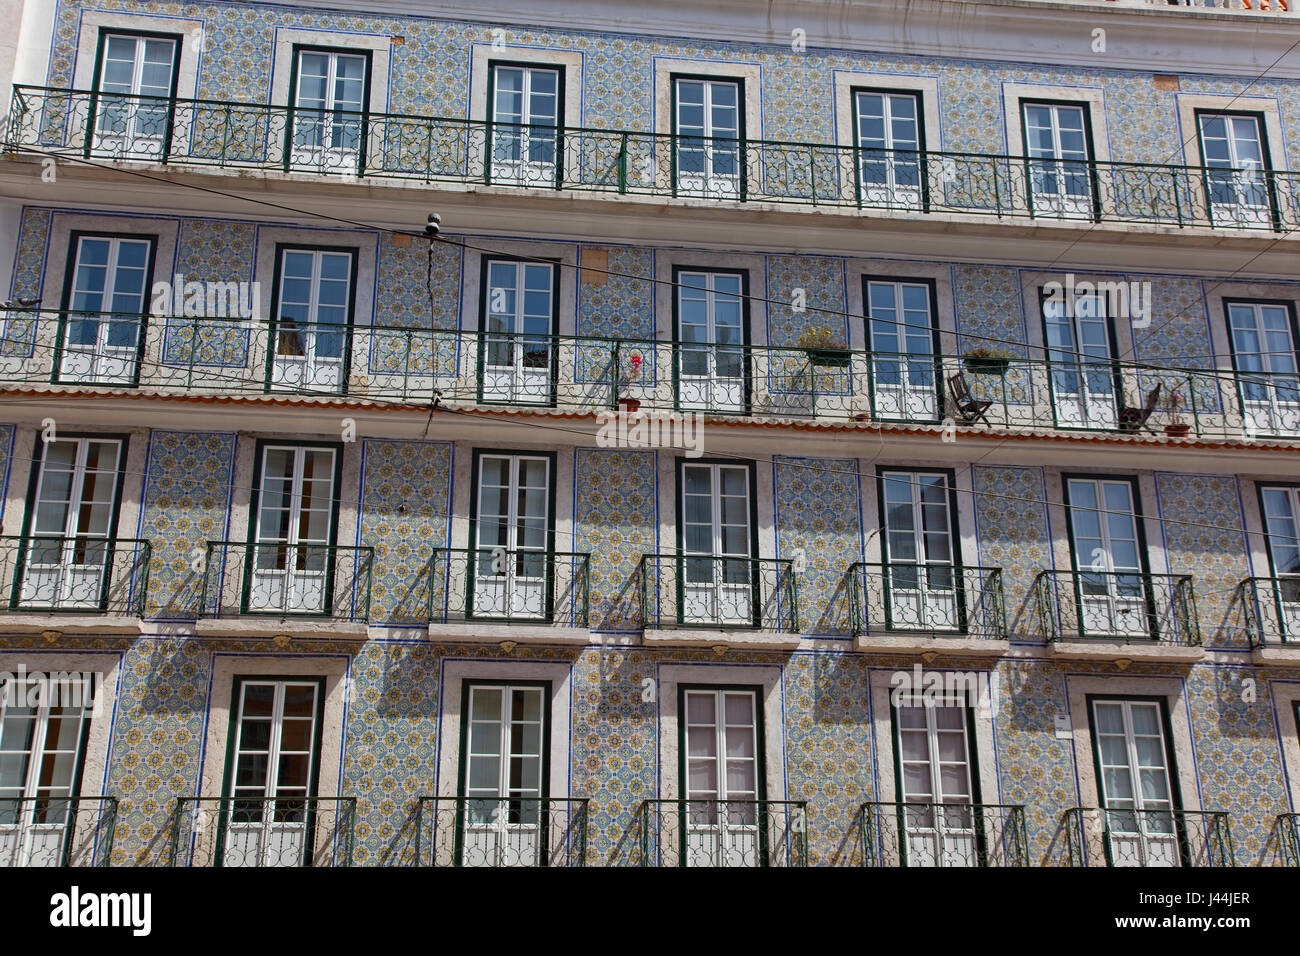 Portugal, Estremadura, Lisbon, Bairro Alto, Typical apartment building with tiled exterior, balconies and french windows. Stock Photo